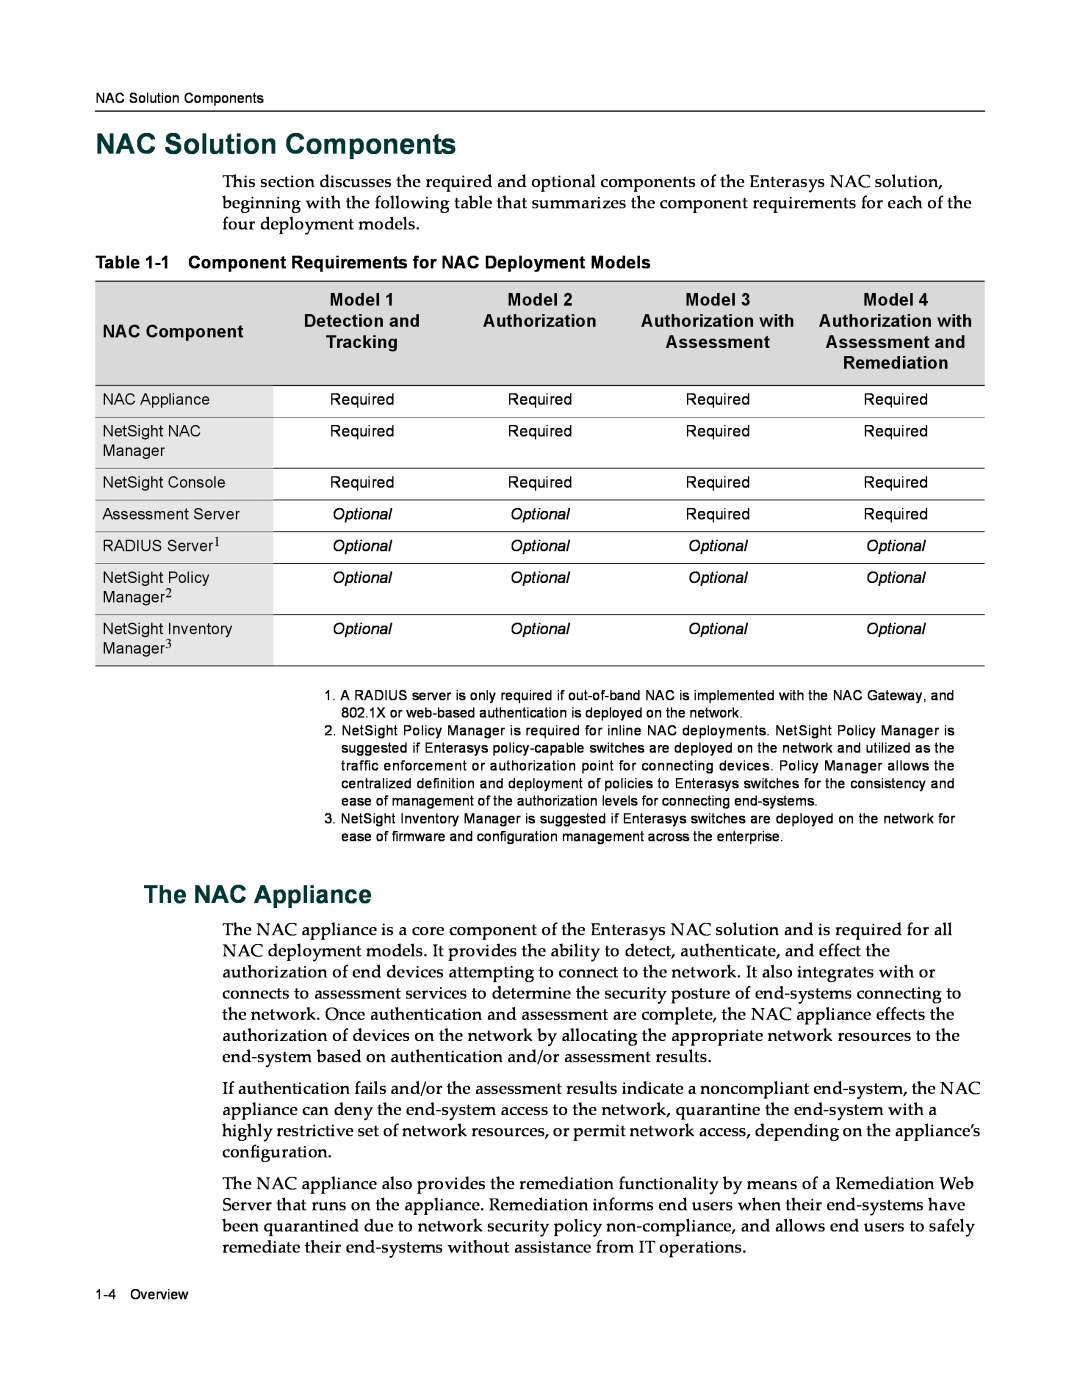 Enterasys Networks 9034385 NAC Solution Components, The NAC Appliance, 1 Component Requirements for NAC Deployment Models 